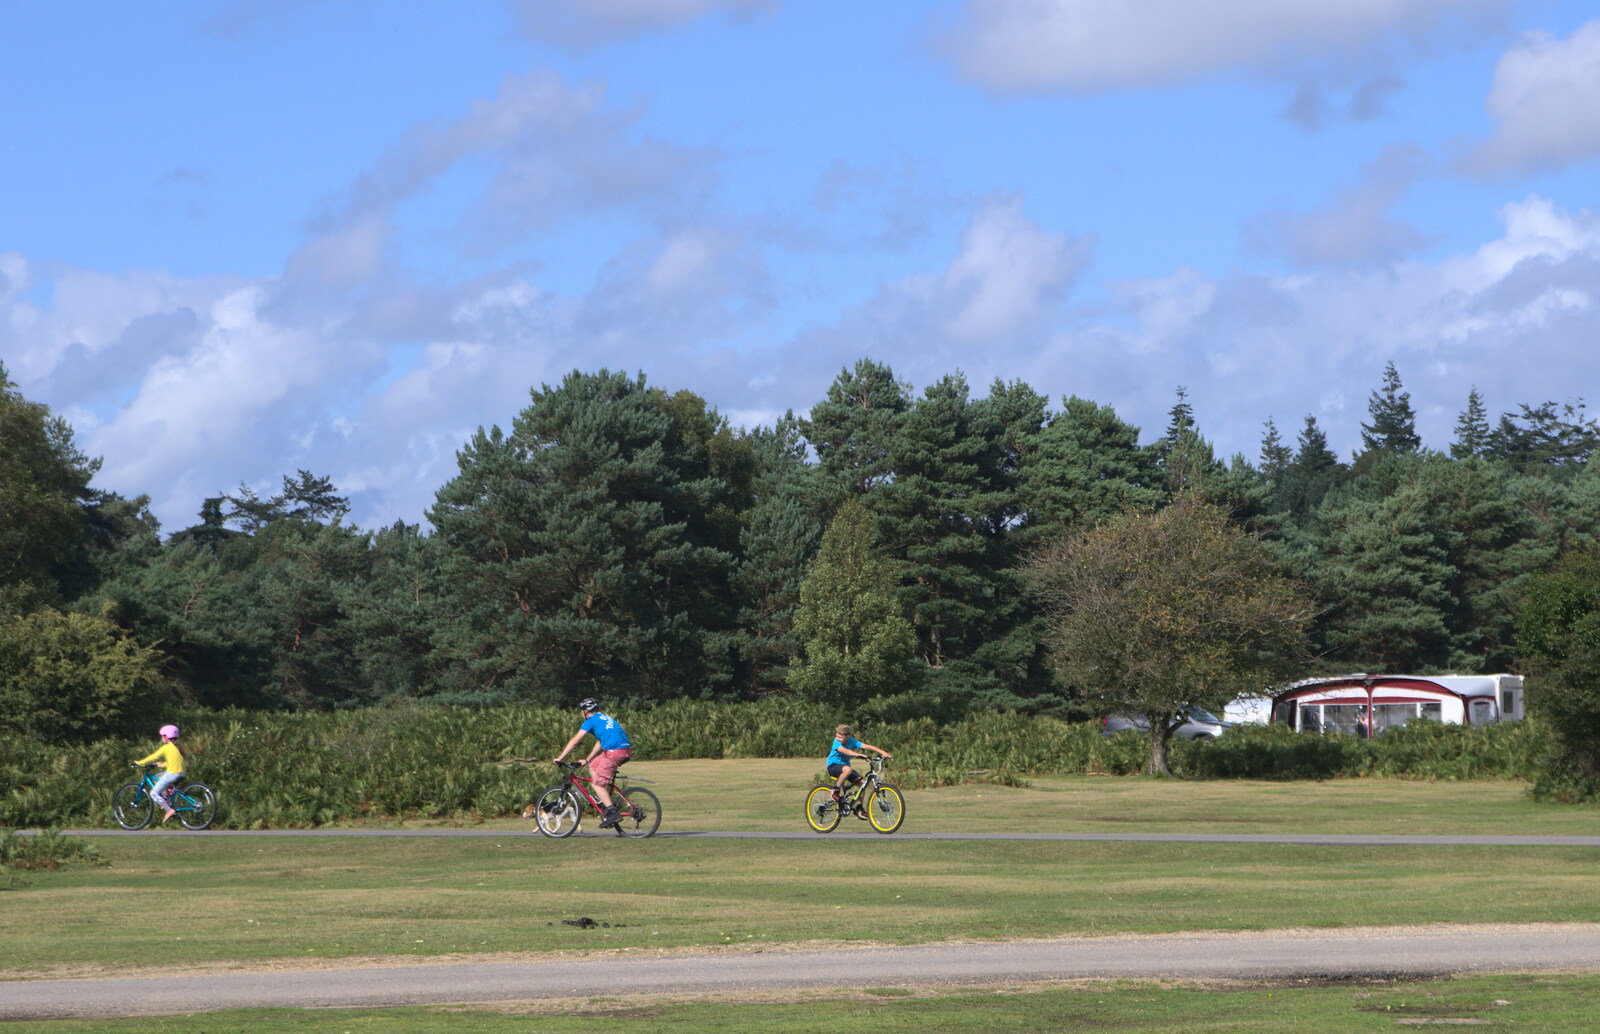 Cyclists at Roundhills from Camping at Roundhills, Brockenhurst, New Forest, Hampshire - 29th August 2015